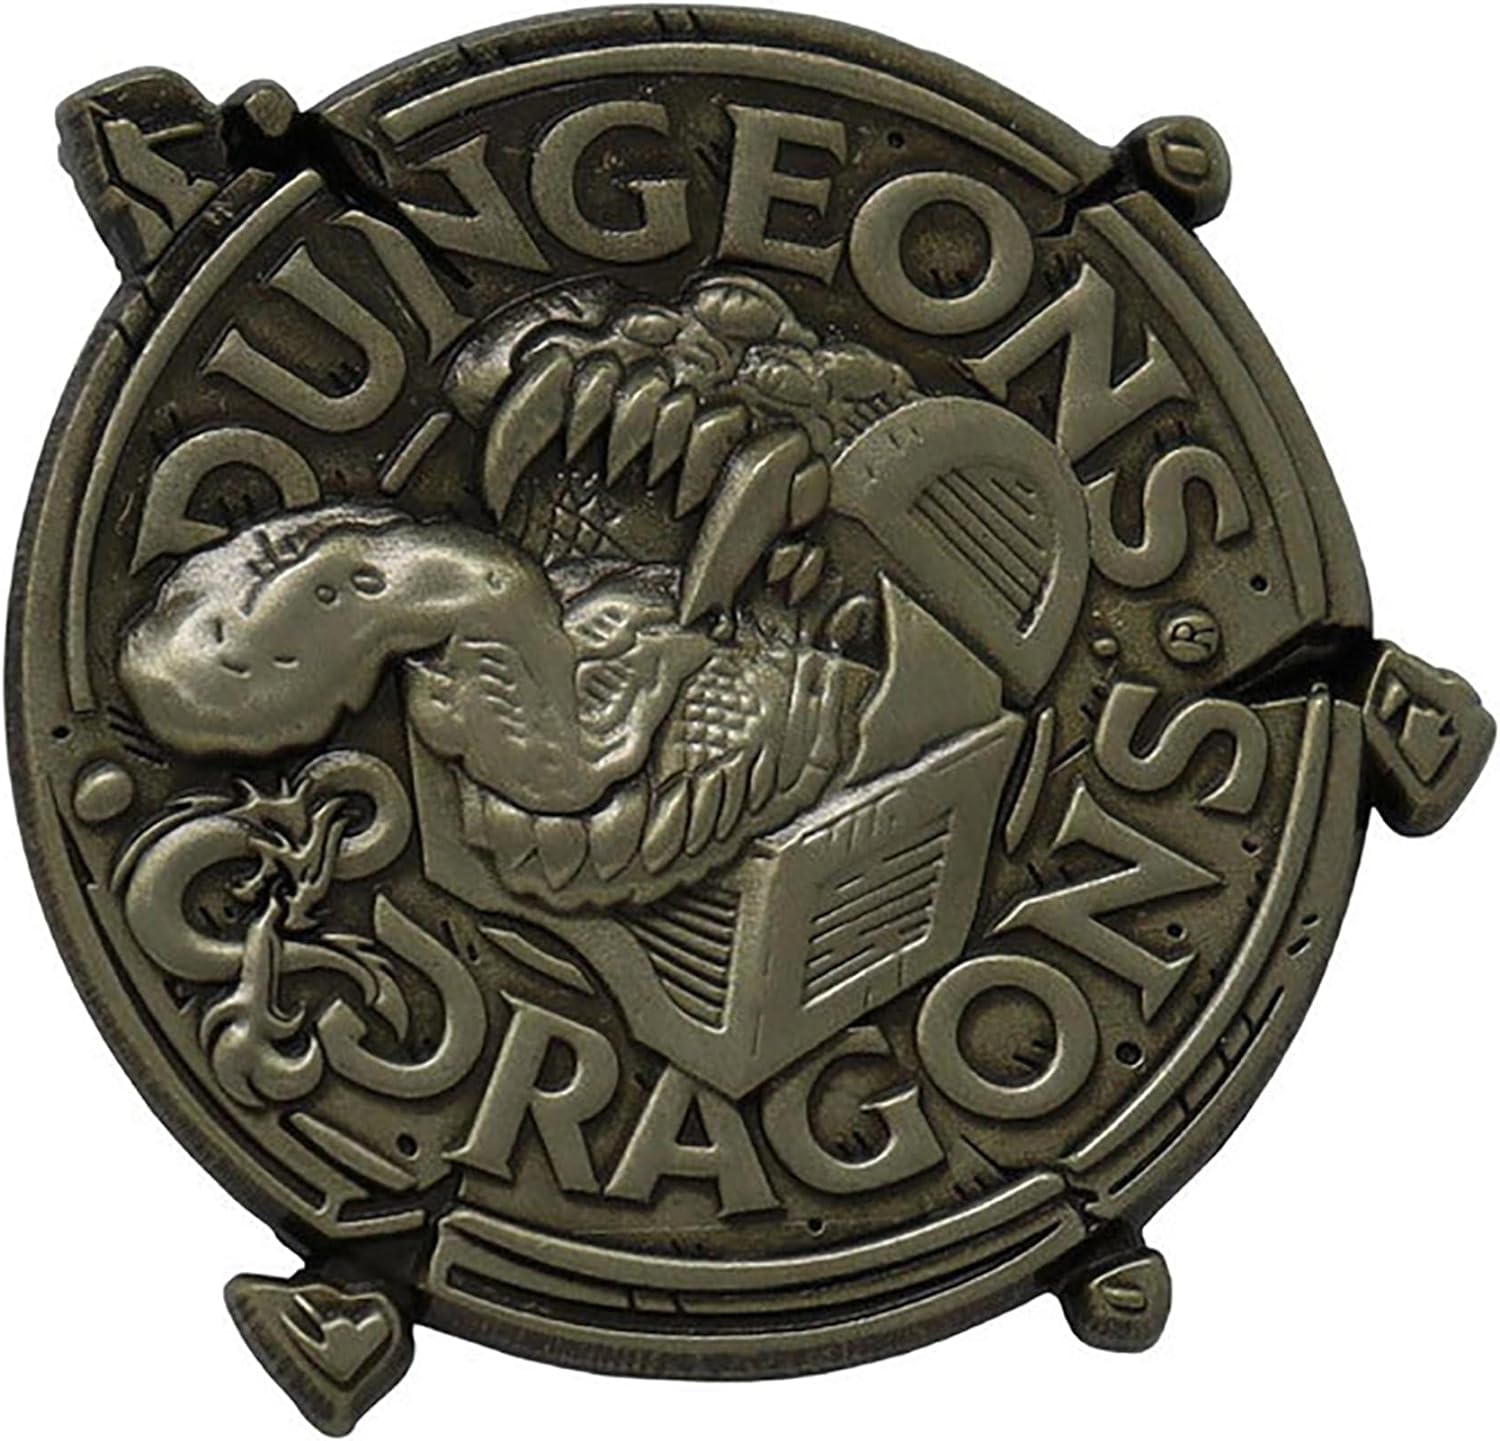 D&D Limited Edition Premium Pin Badge